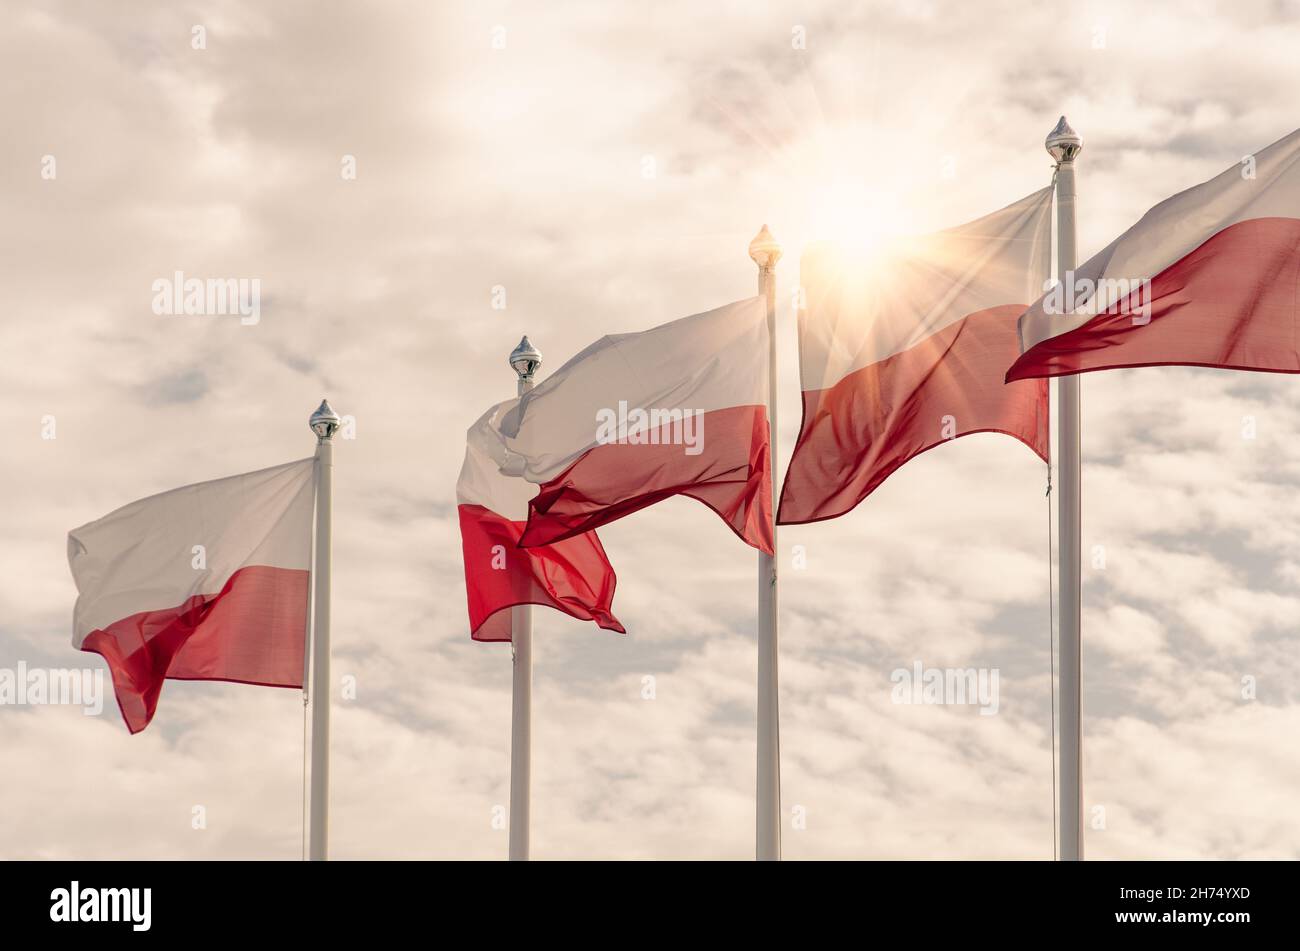 Polish national flags flutter in the wind on a cloudy sky background with sunrays Stock Photo